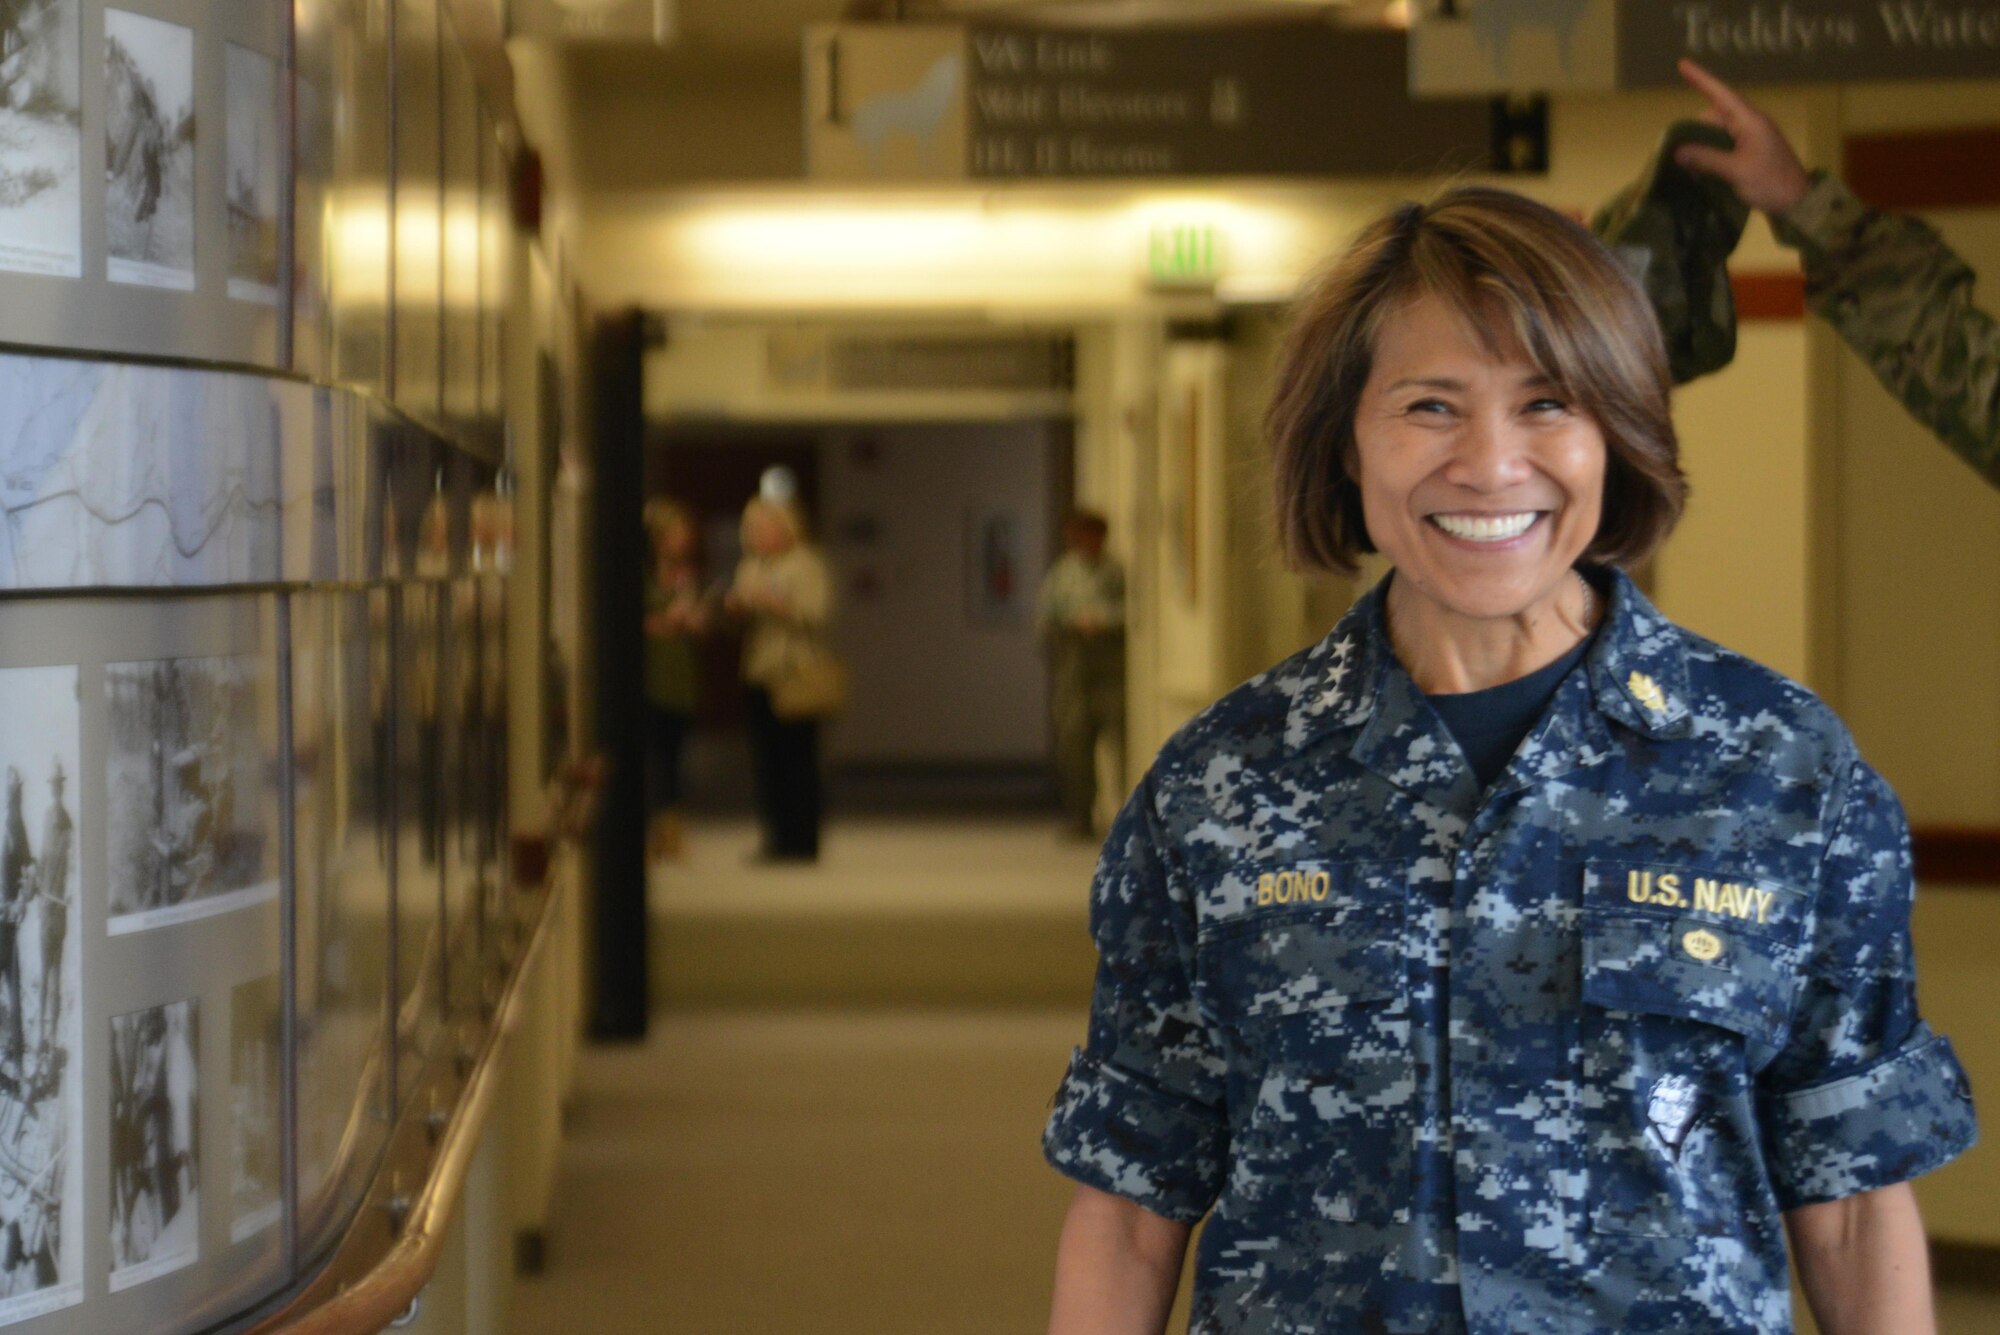 Vice Adm. Raquel Bono, Defense Health Agency director, tours the Joint Base Elmendorf-Richardson hospital, Alaska, Aug. 18, 2016. The DHA is a joint agency that enables Army, Navy and Air Force medical services to provide a healthy force in both peacetime and war. (U.S. Air Force photo by Airman 1st Class Christopher R. Morales)